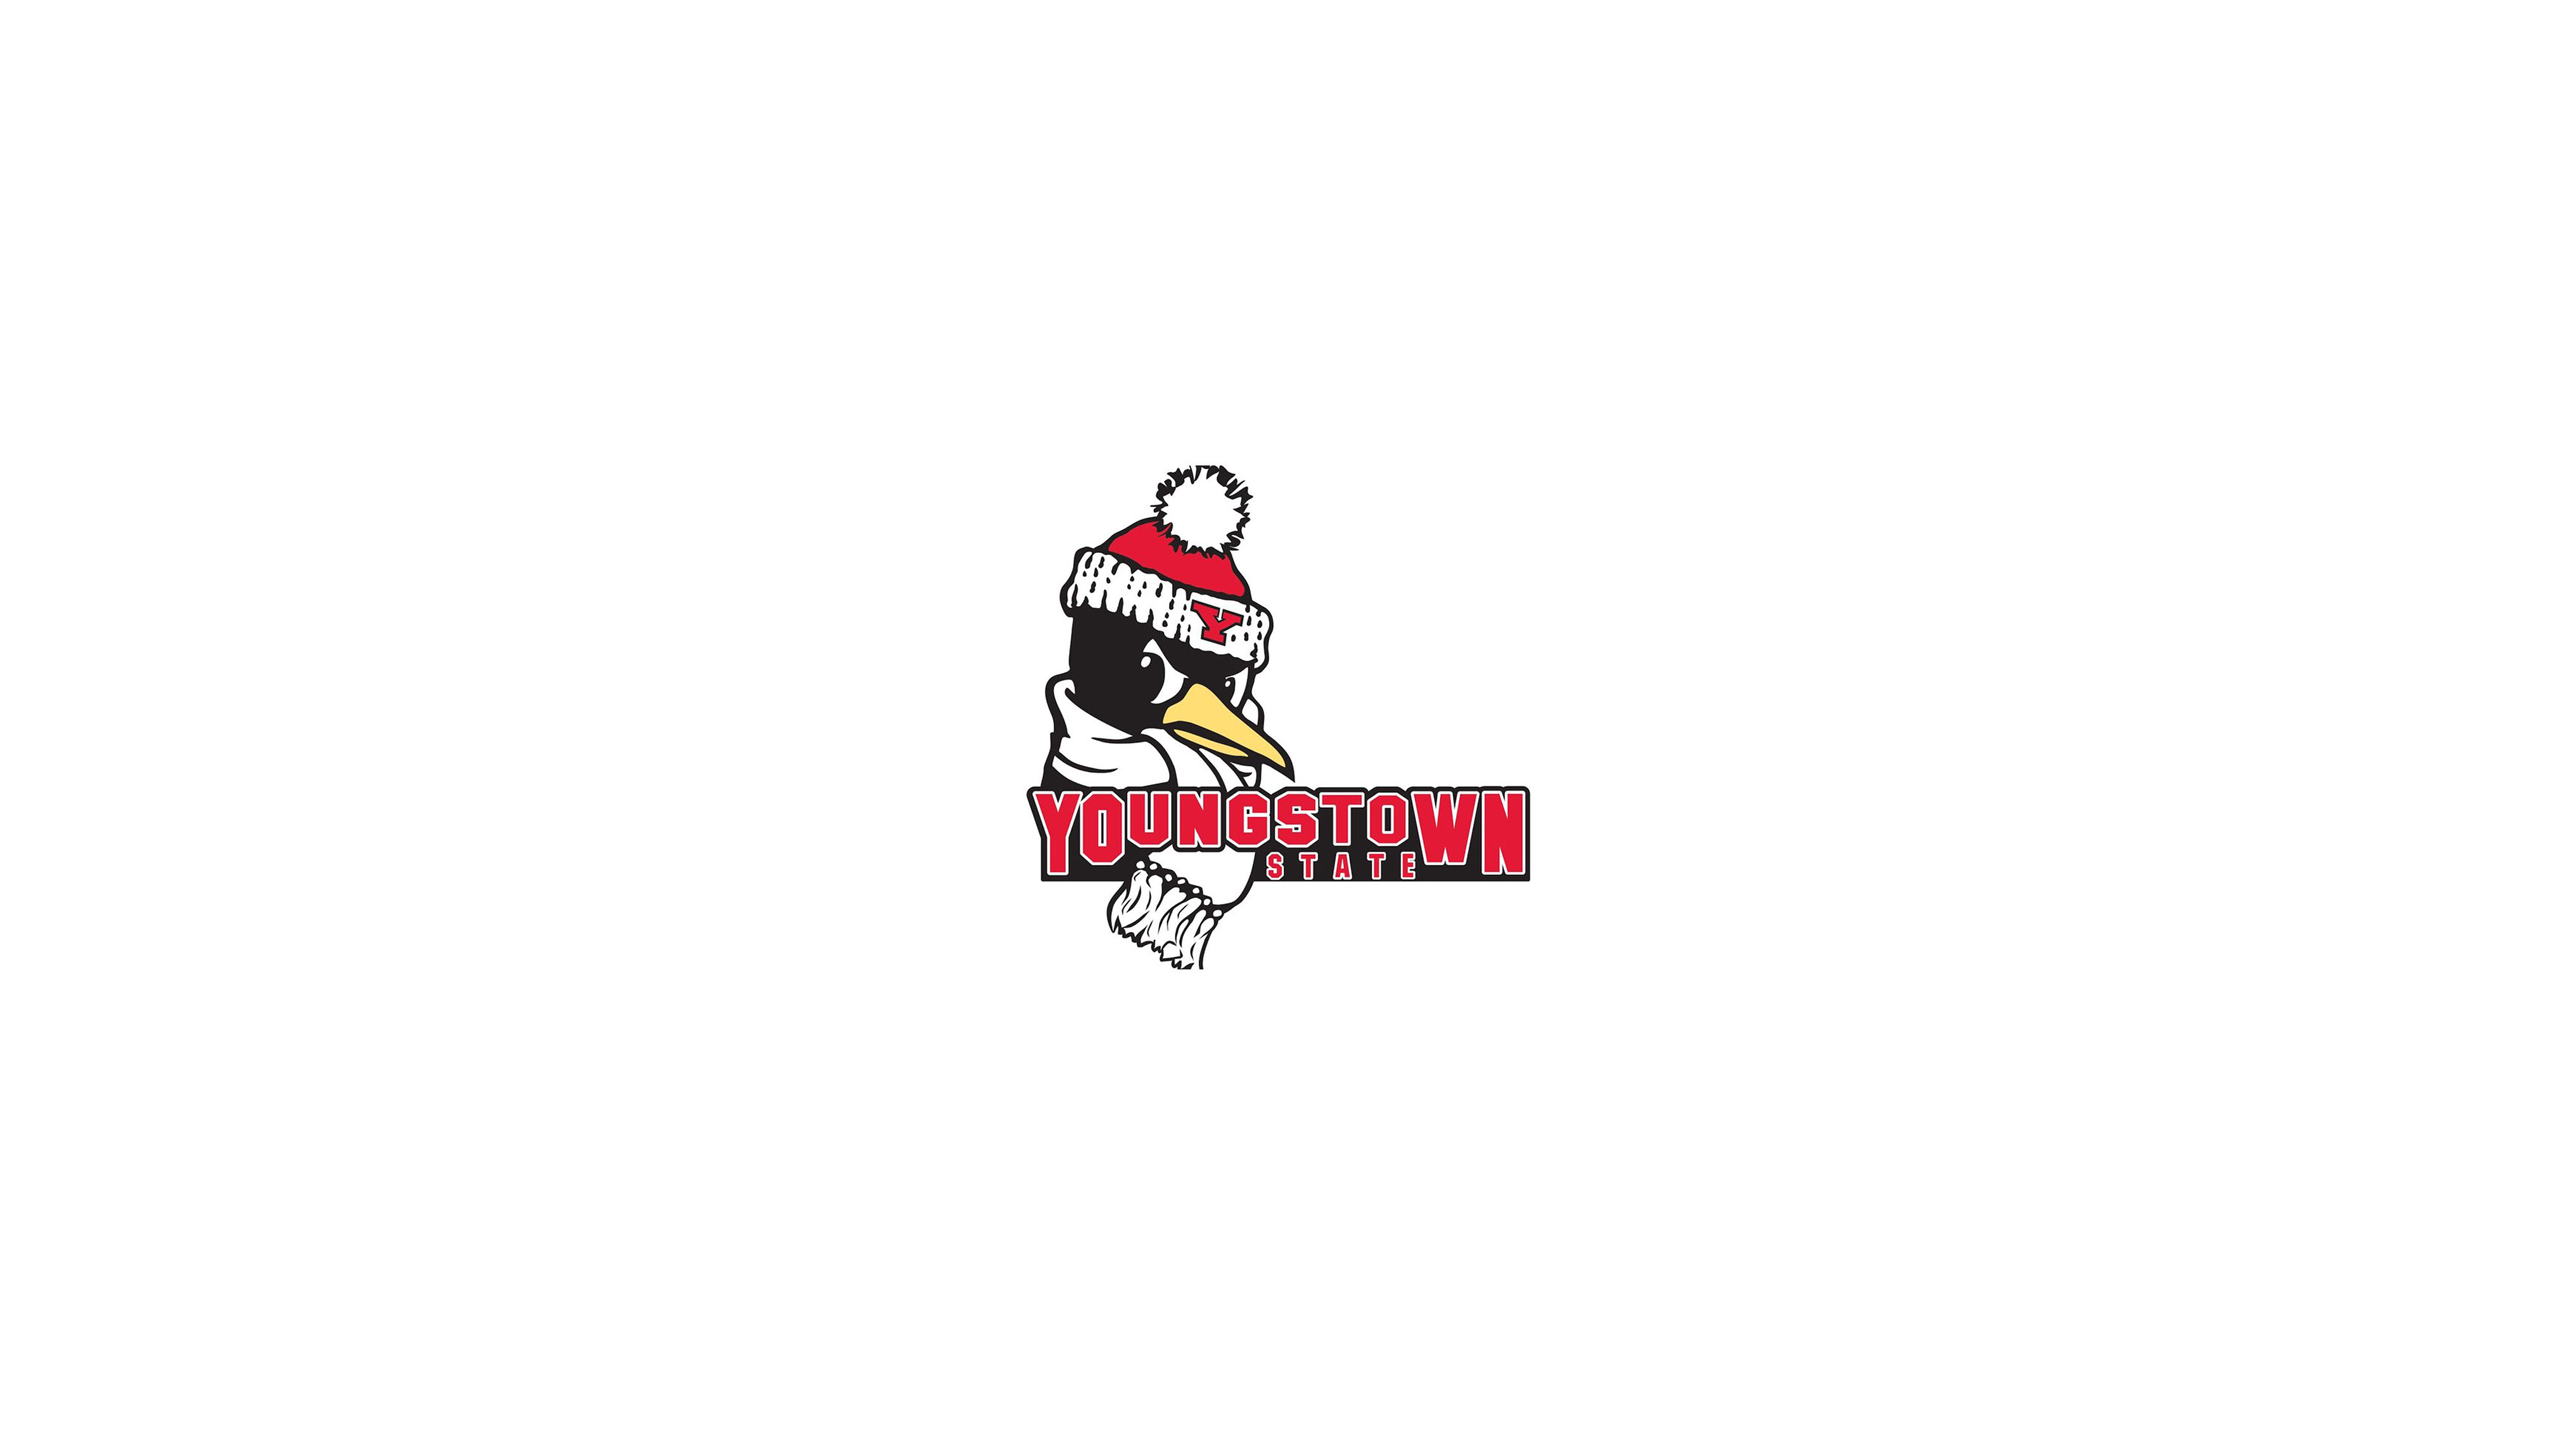 Youngstown State Penguins Basketball - NCAAB - Square Bettor